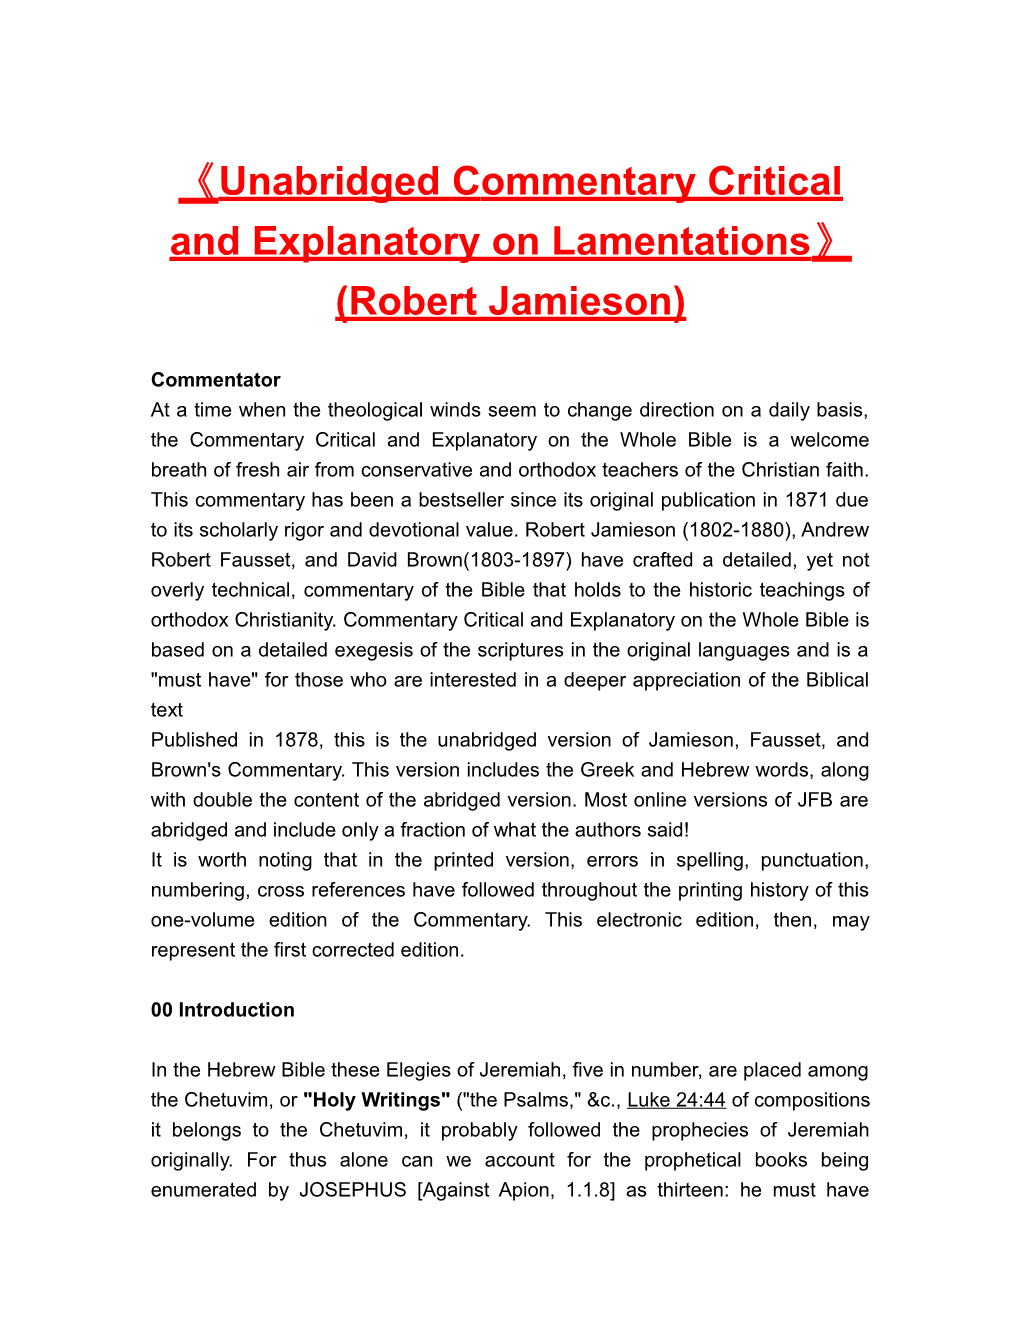 Unabridged Commentary Critical and Explanatory on Lamentations (Robert Jamieson)